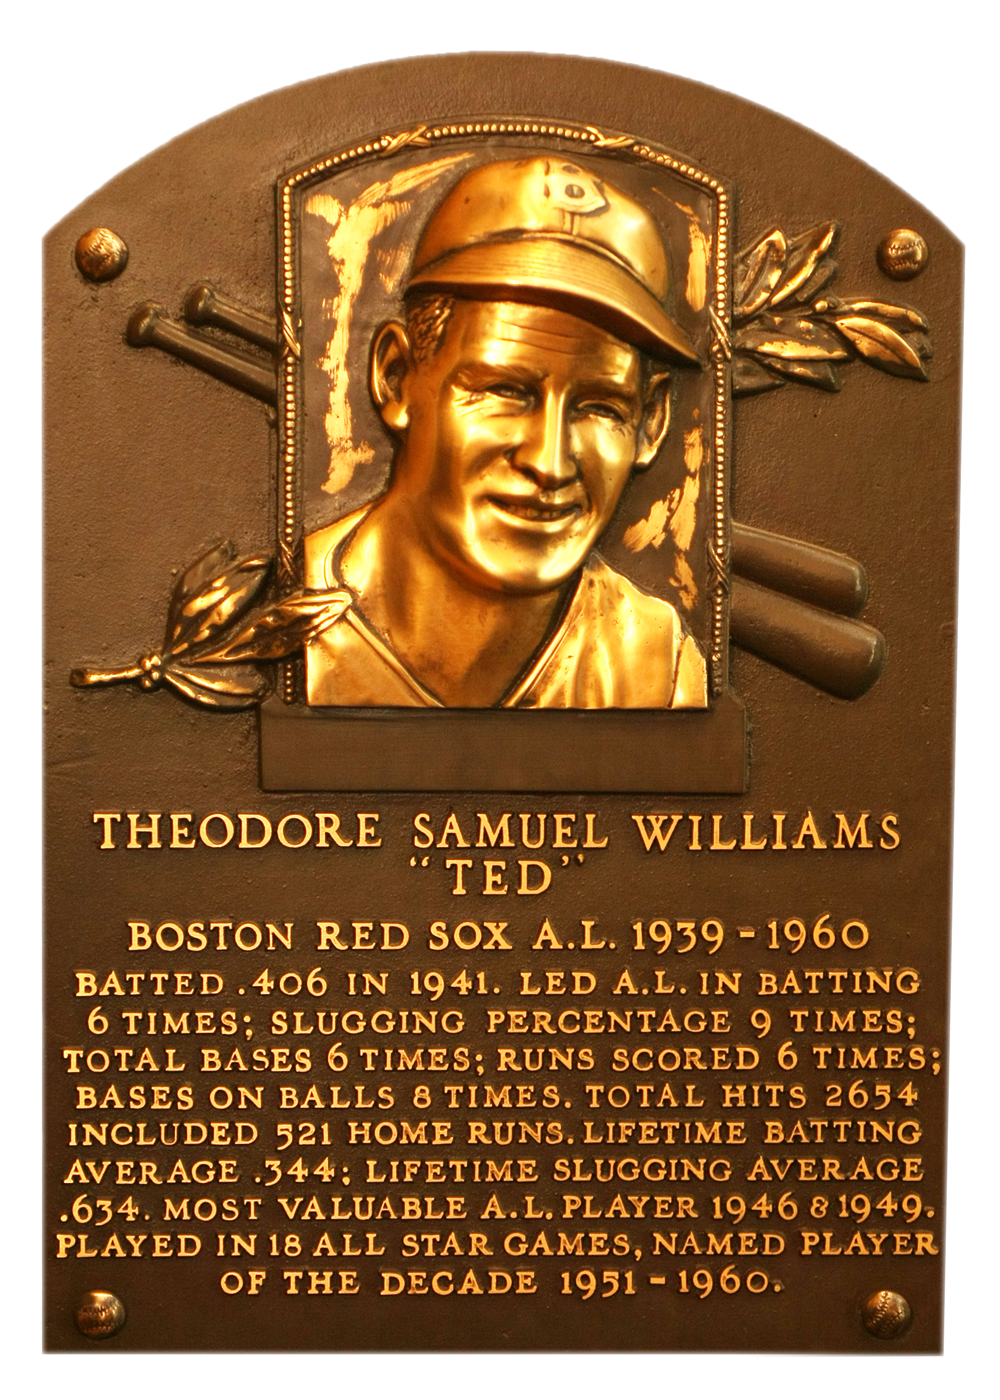 Ted Williams Hall of Fame plaque